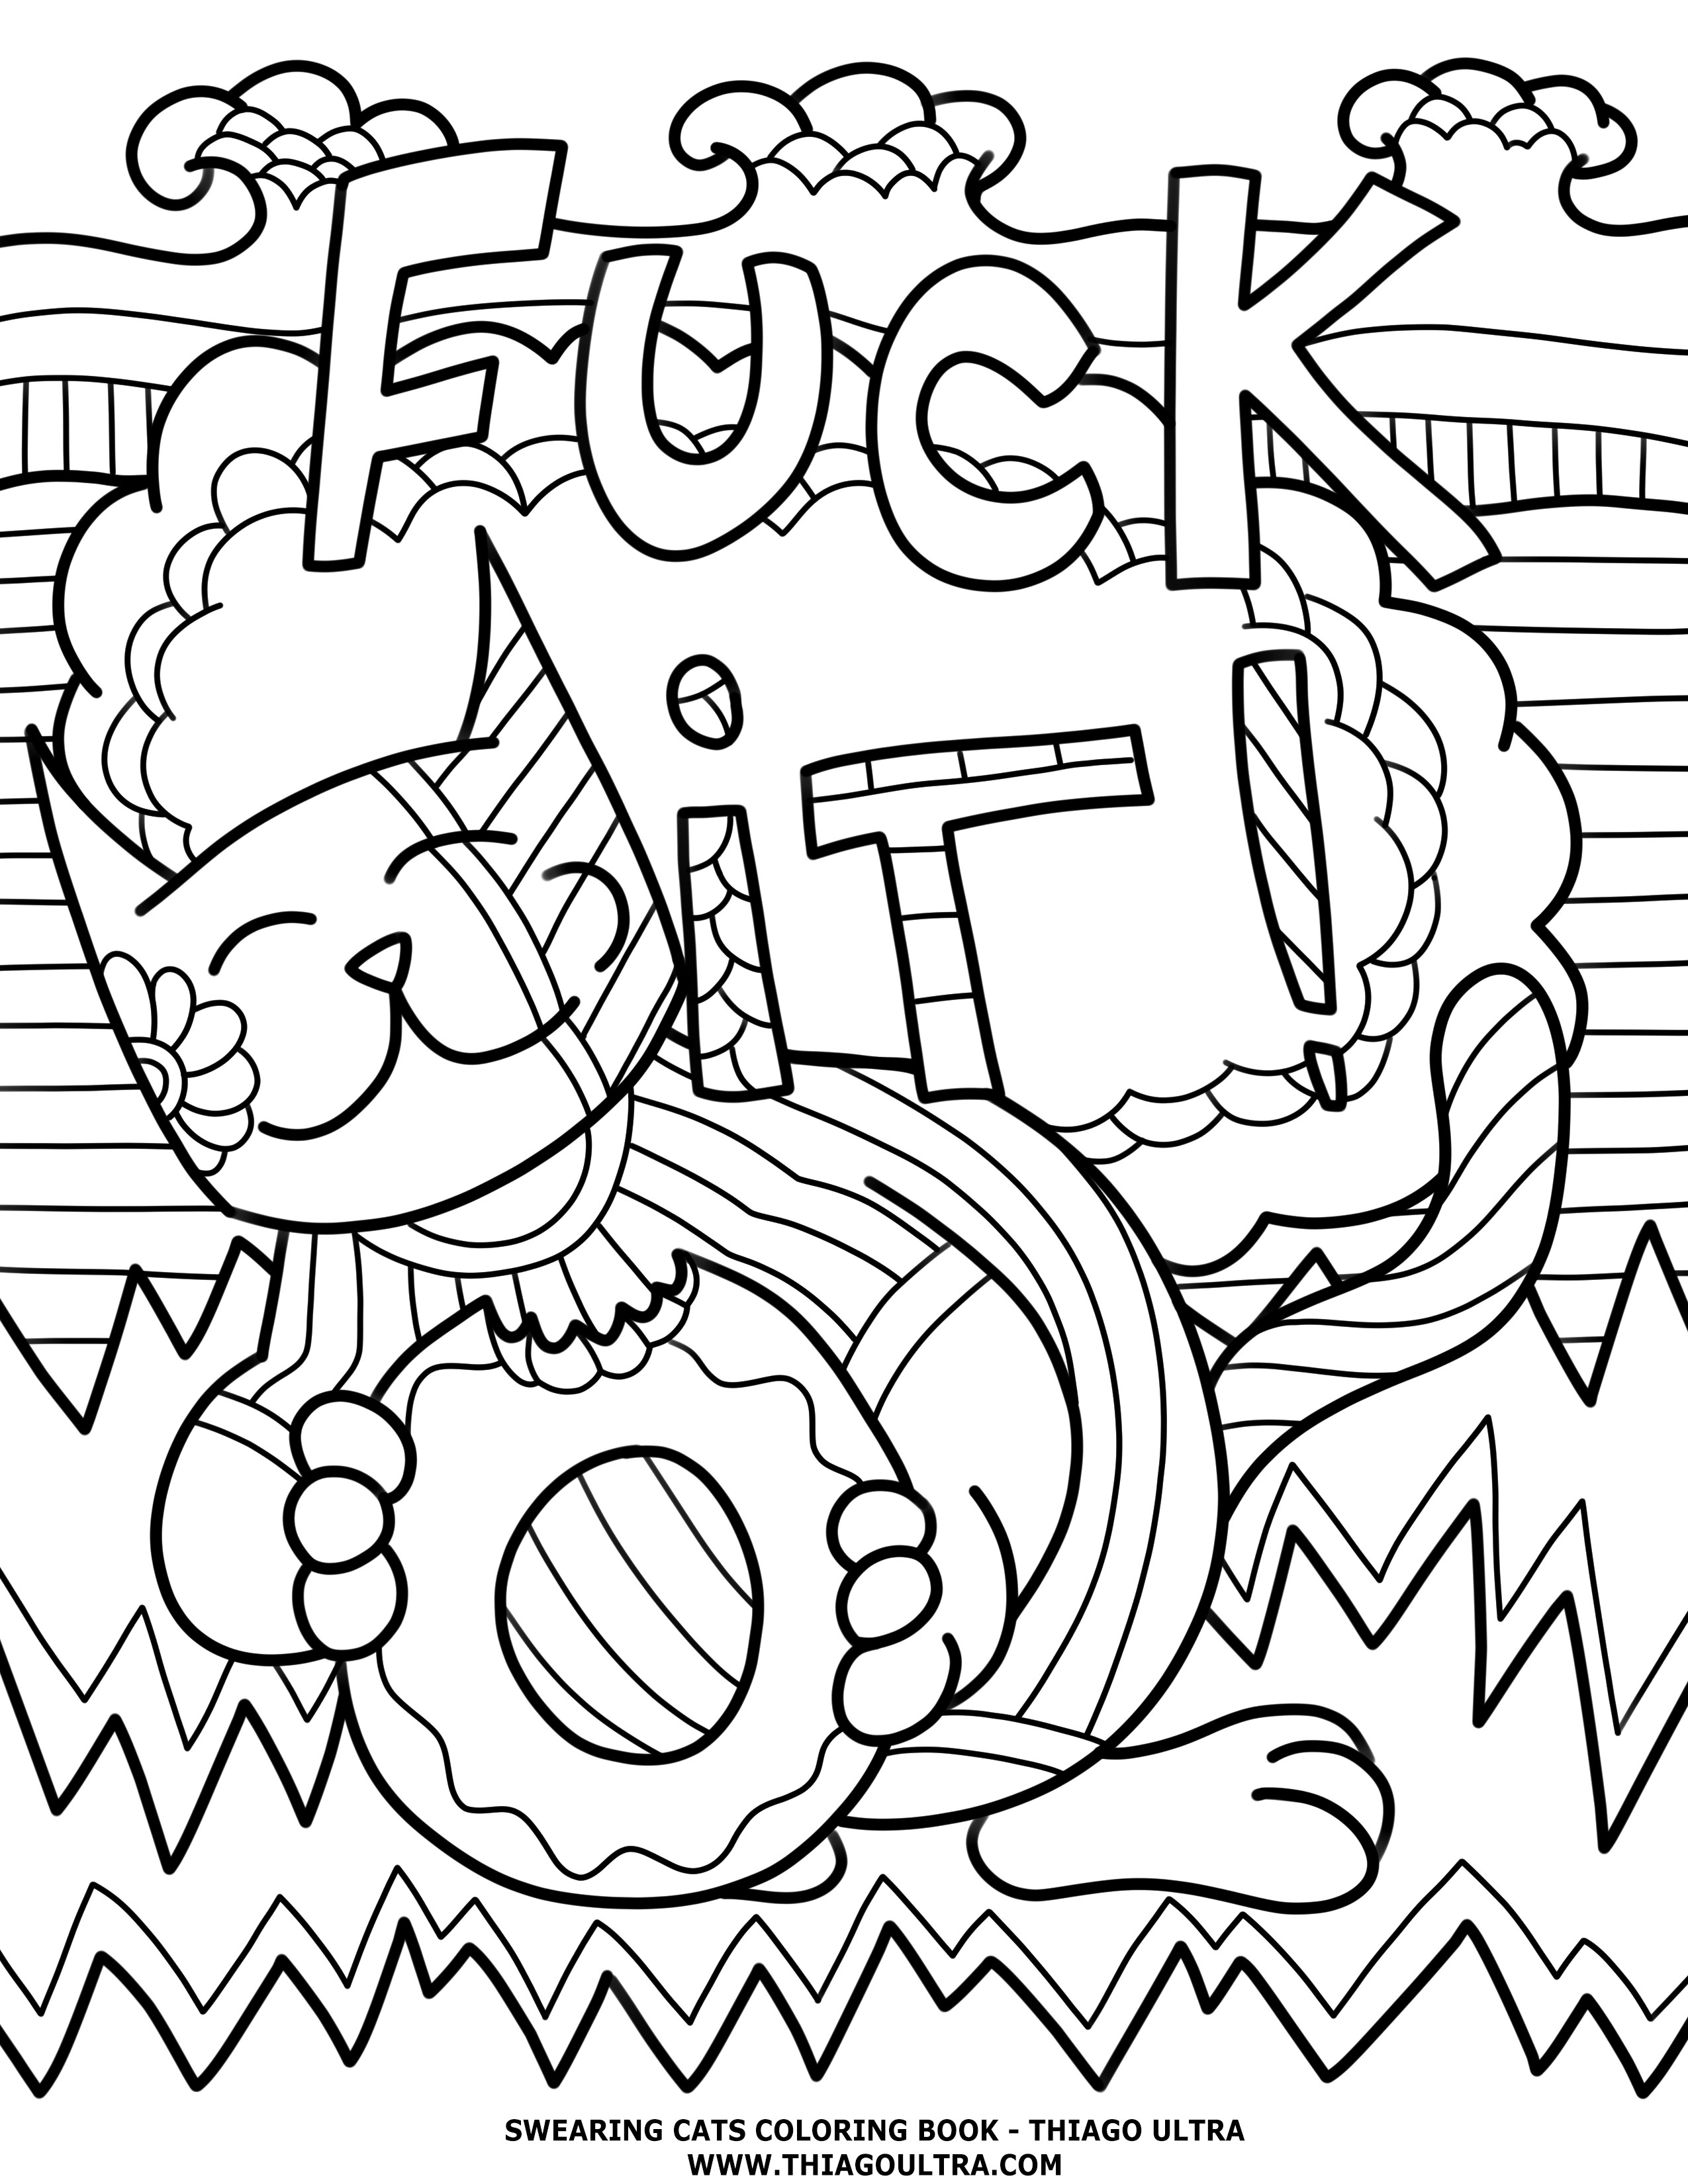 Free Printable Coloring Pages For Adults Only Swear Words
 18awesome Free Printable Coloring Pages For Adults ly